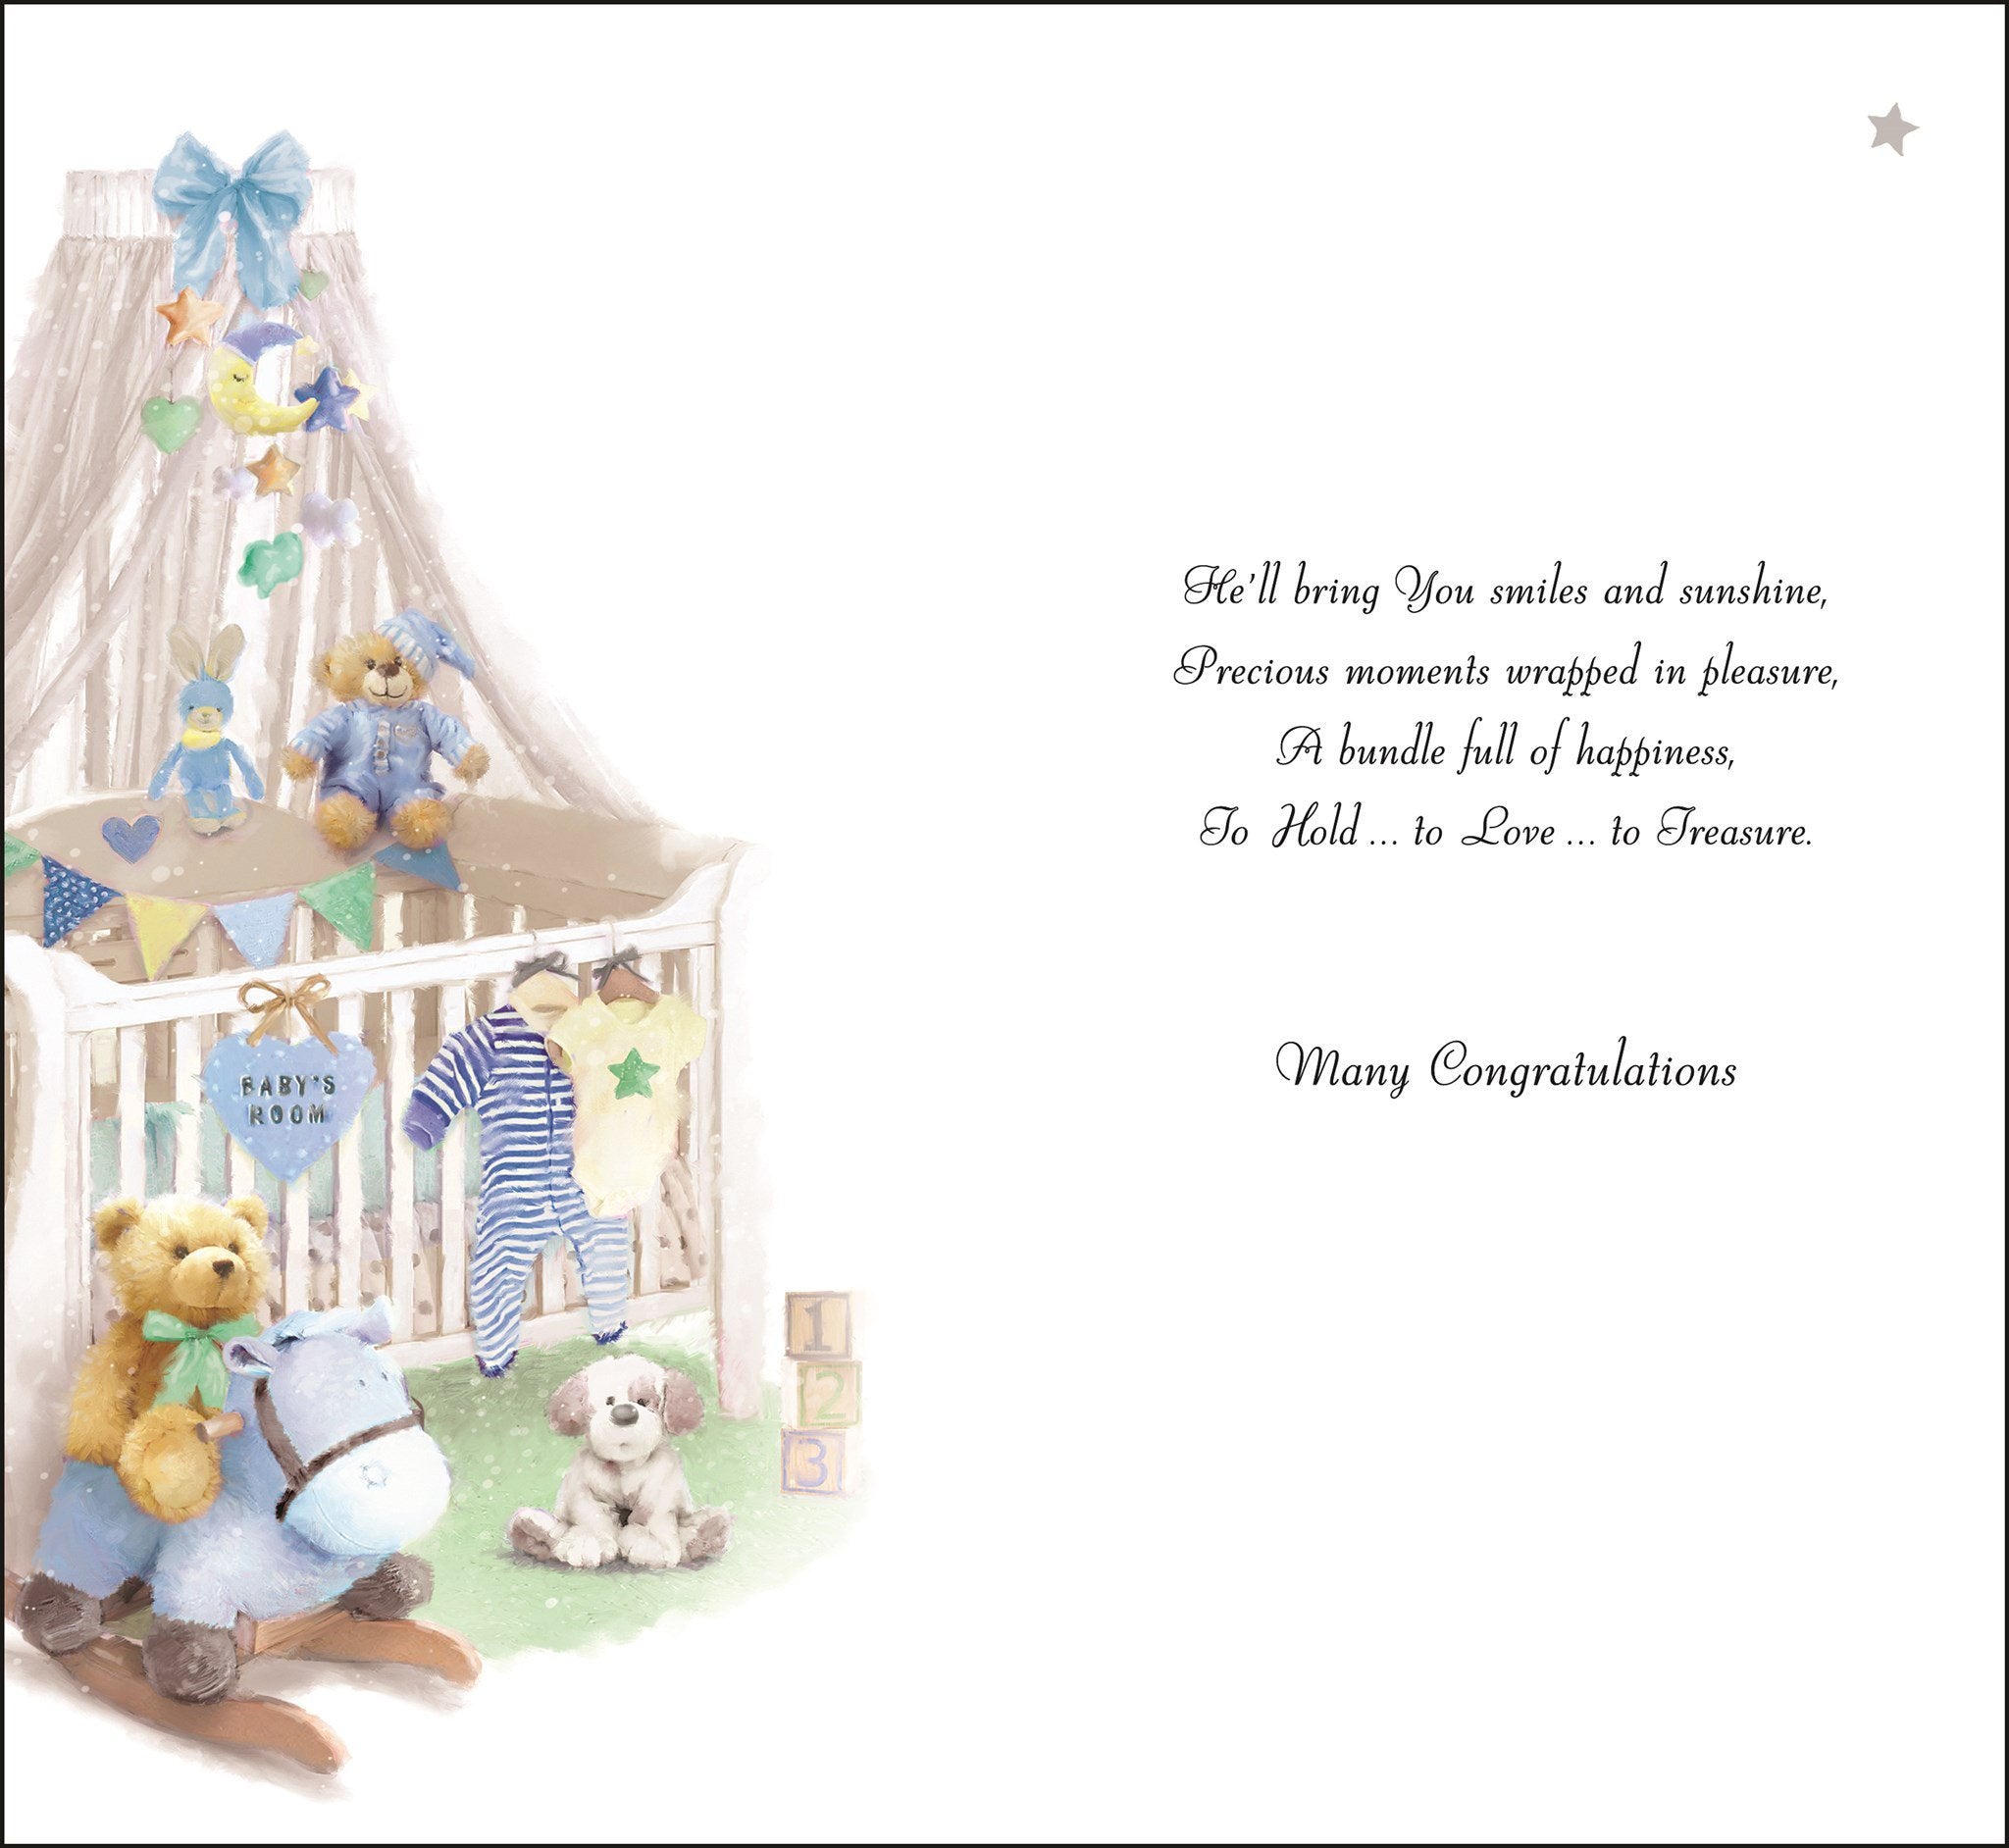 Inside of New Baby Boy Cot Greetings Card